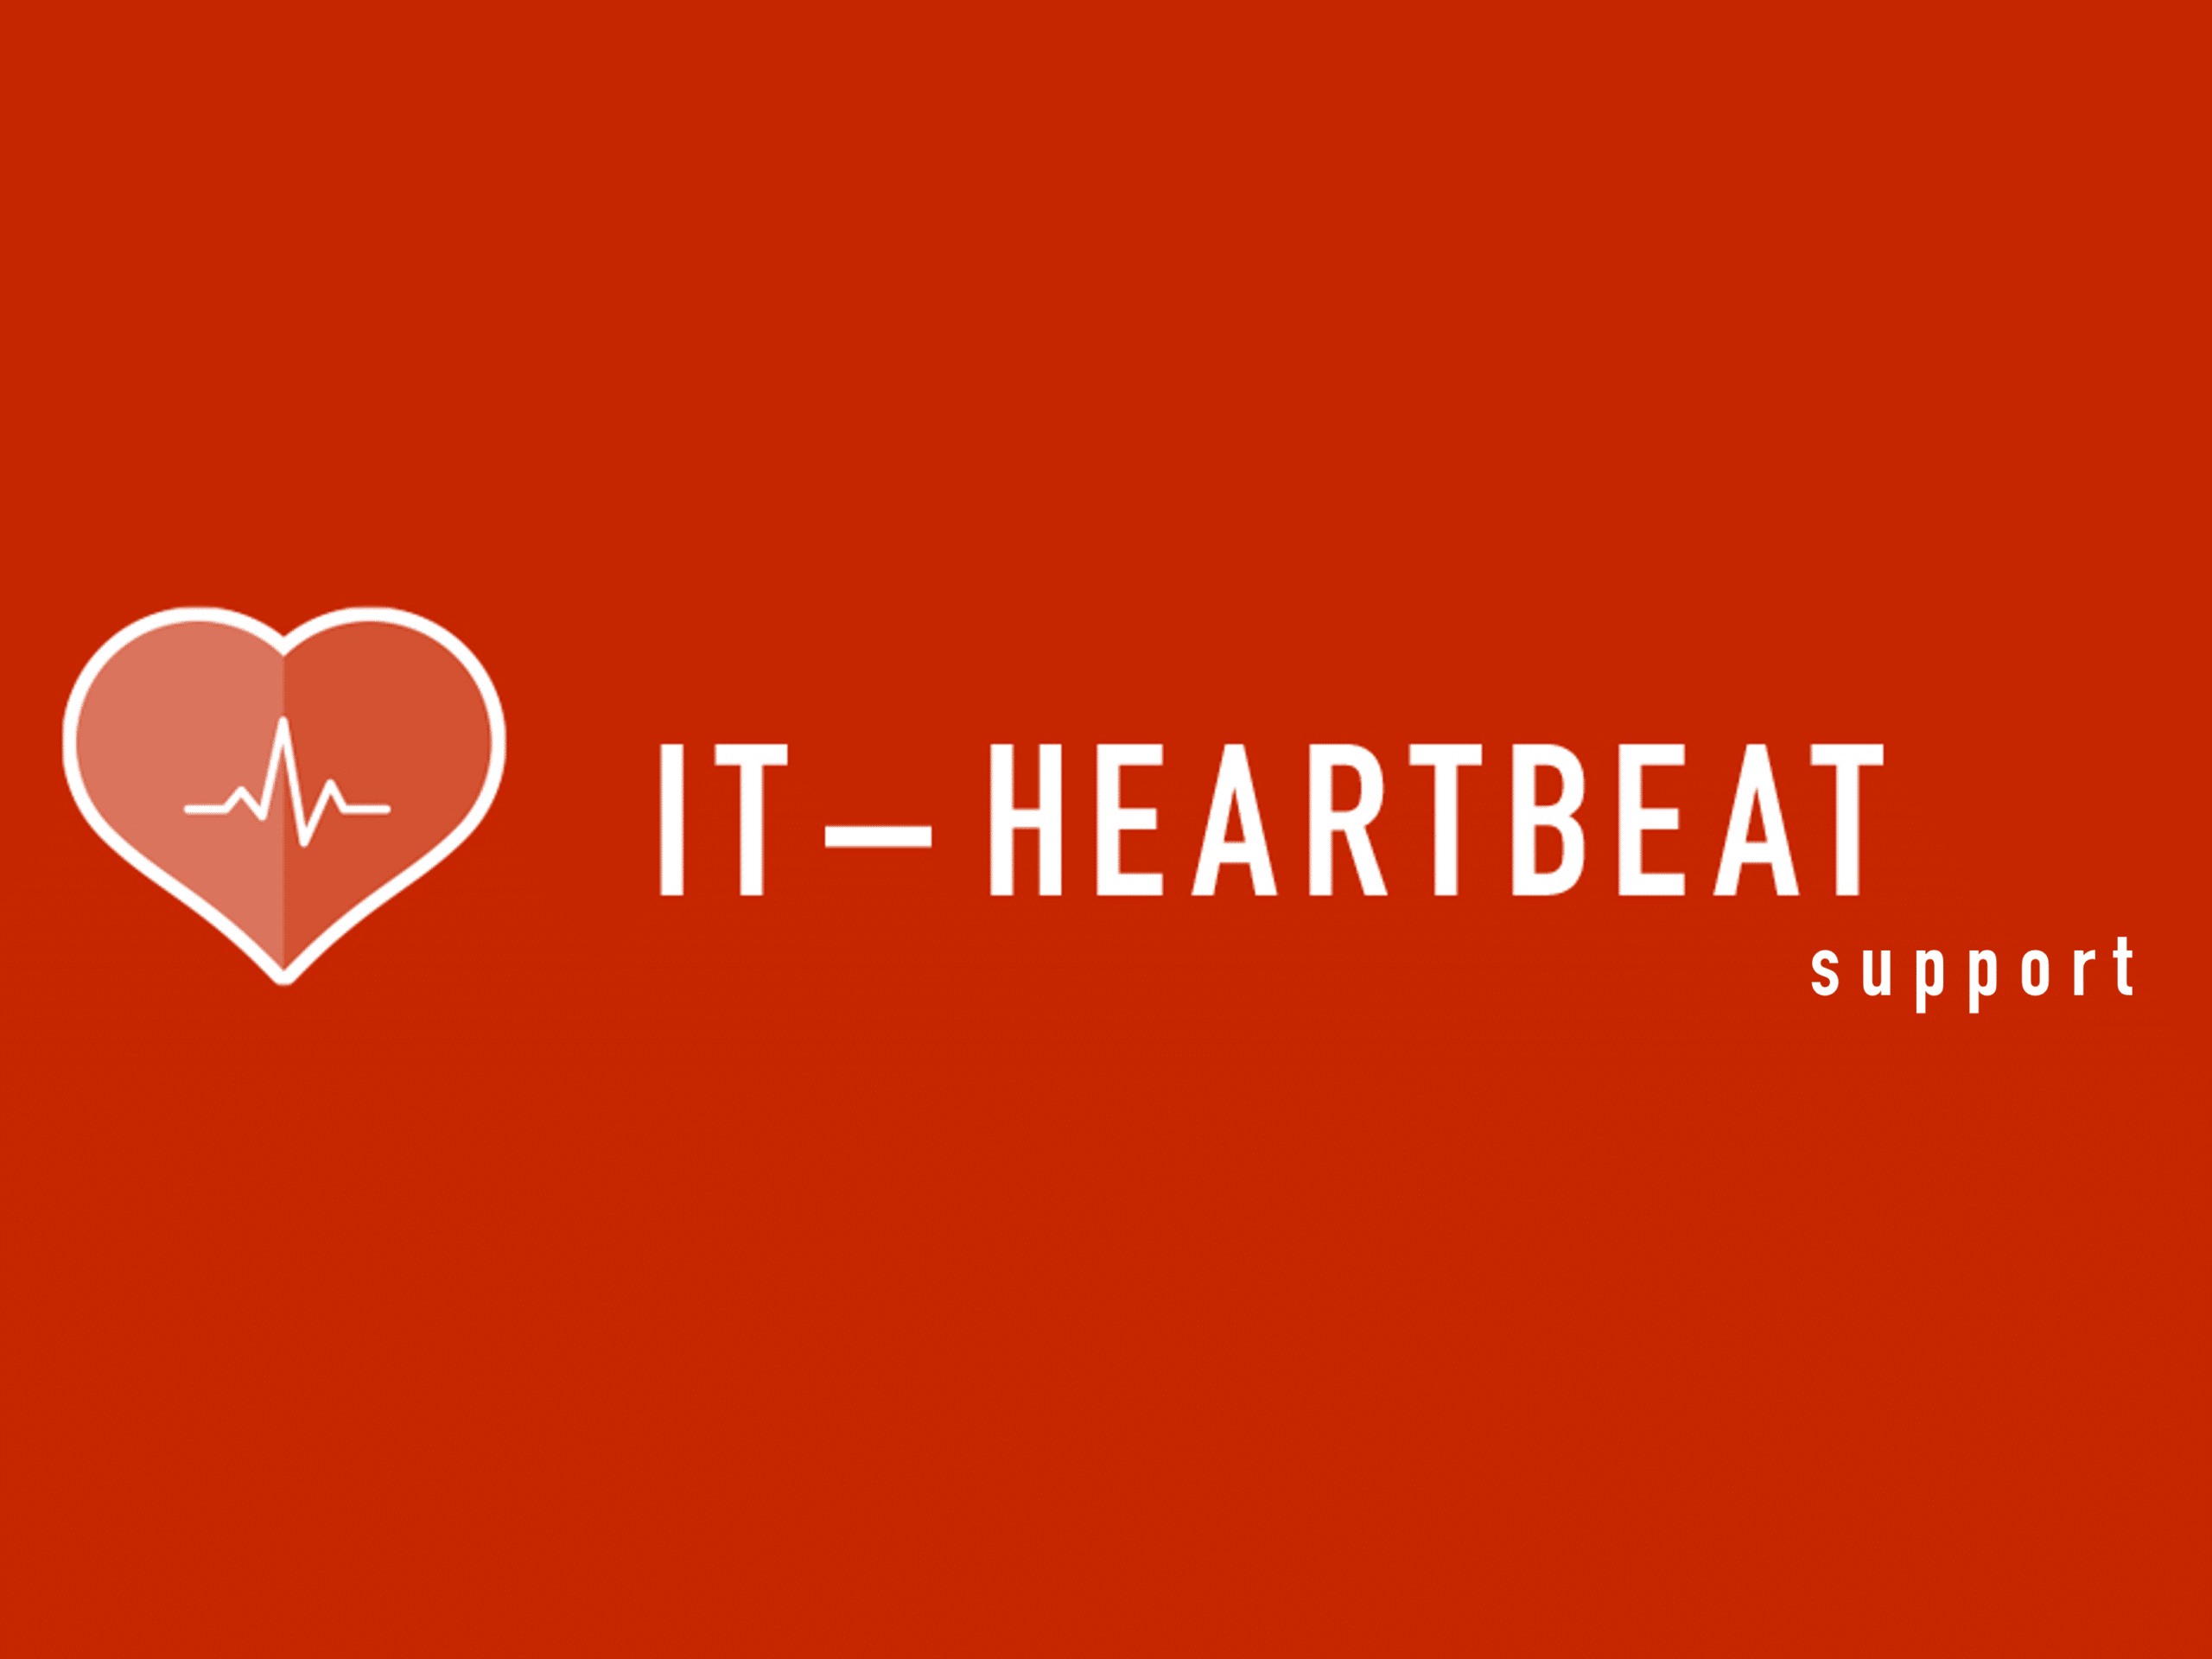 Service image IT-HEARTBEAT support